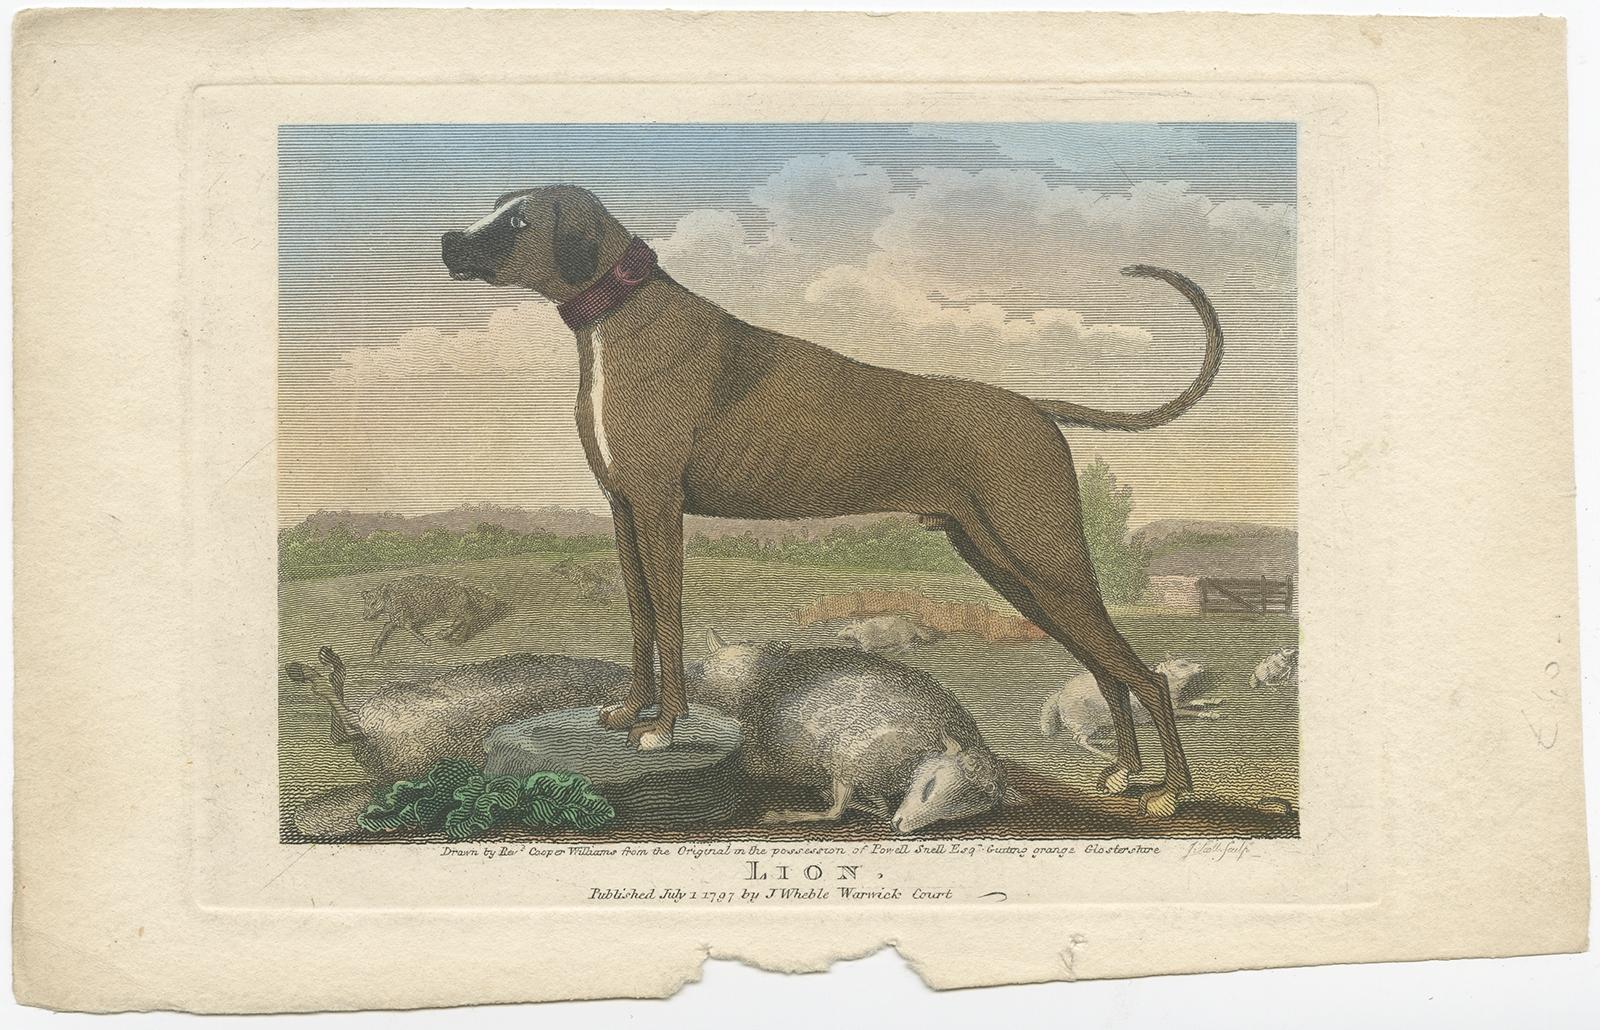 Antique print titled 'Lion'. Engraving of a dog and sheep/hunting scene. Published by J. Wheble 1797. 

Artists and Engravers: Engraved by J. Scott.

Condition: Good, small piece missing. Please study image carefully.